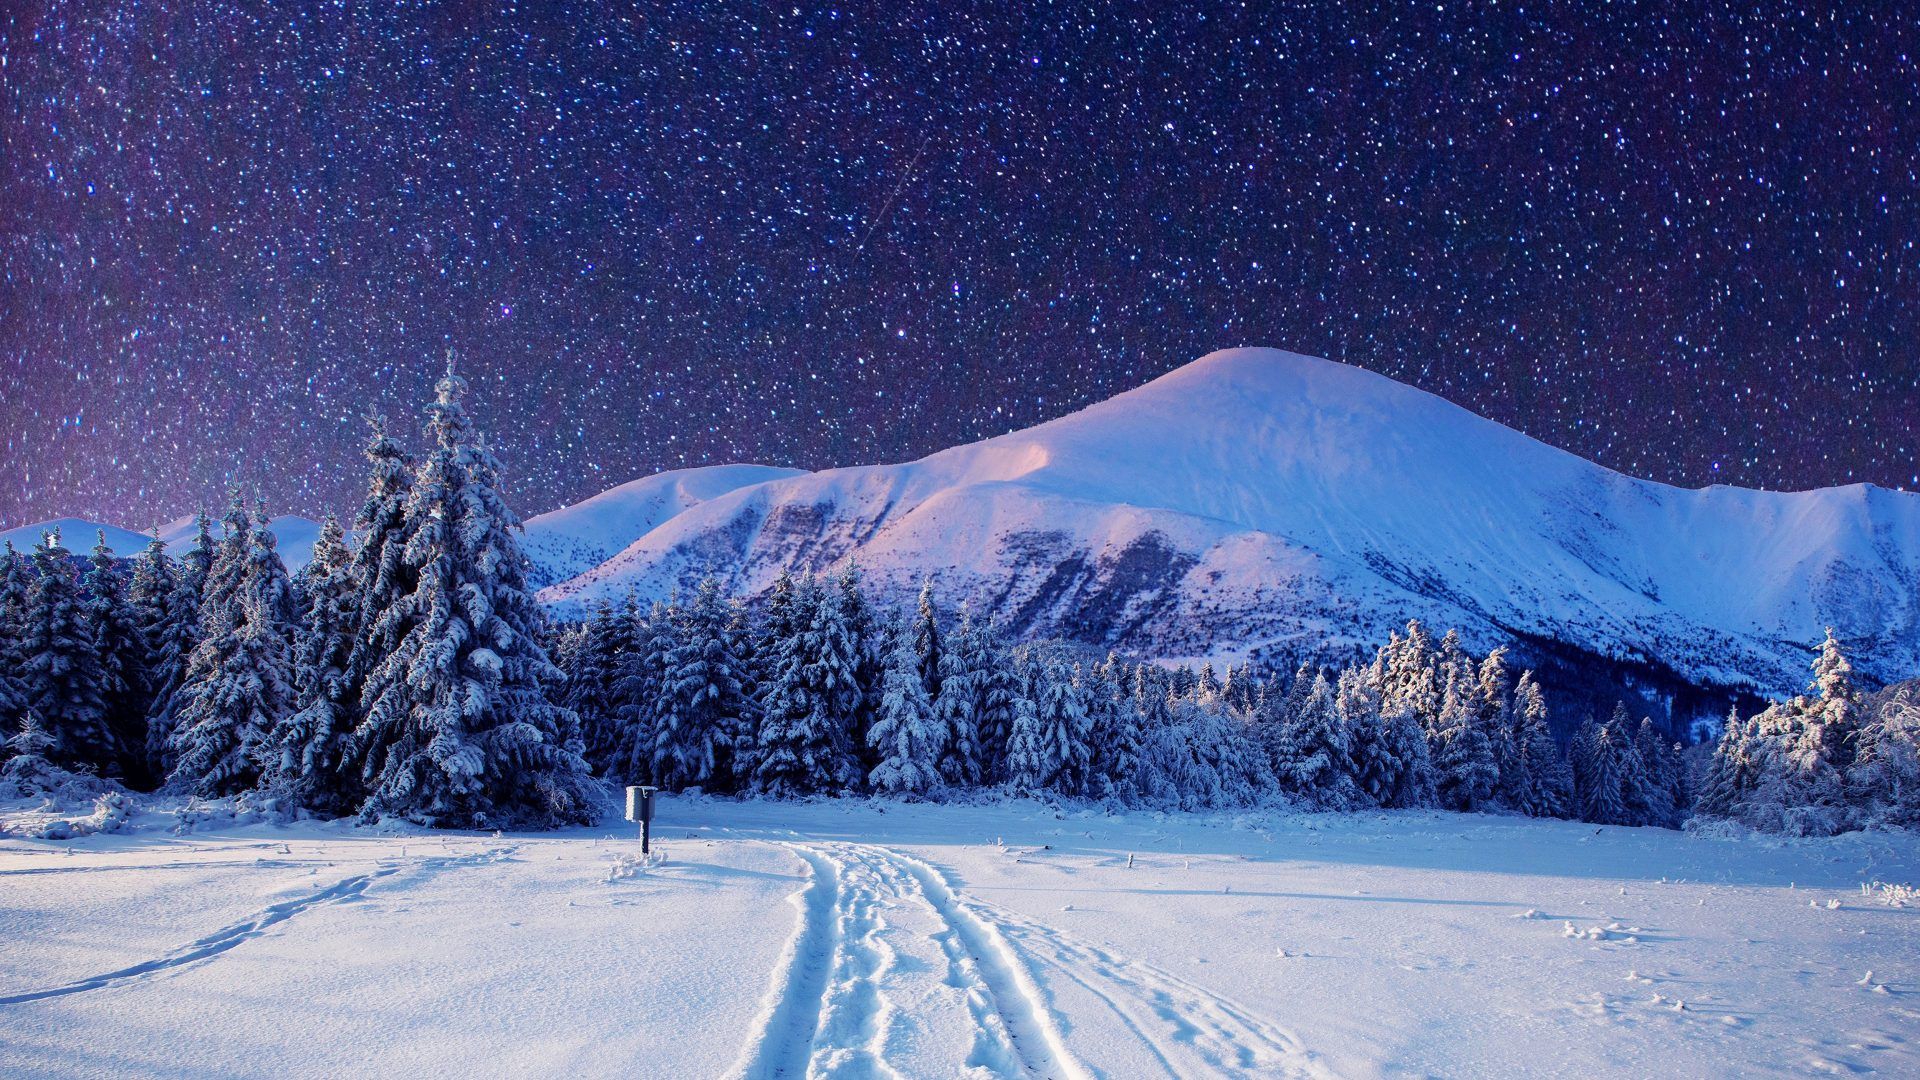 Snow Nature Wallpapers on WallpaperDog